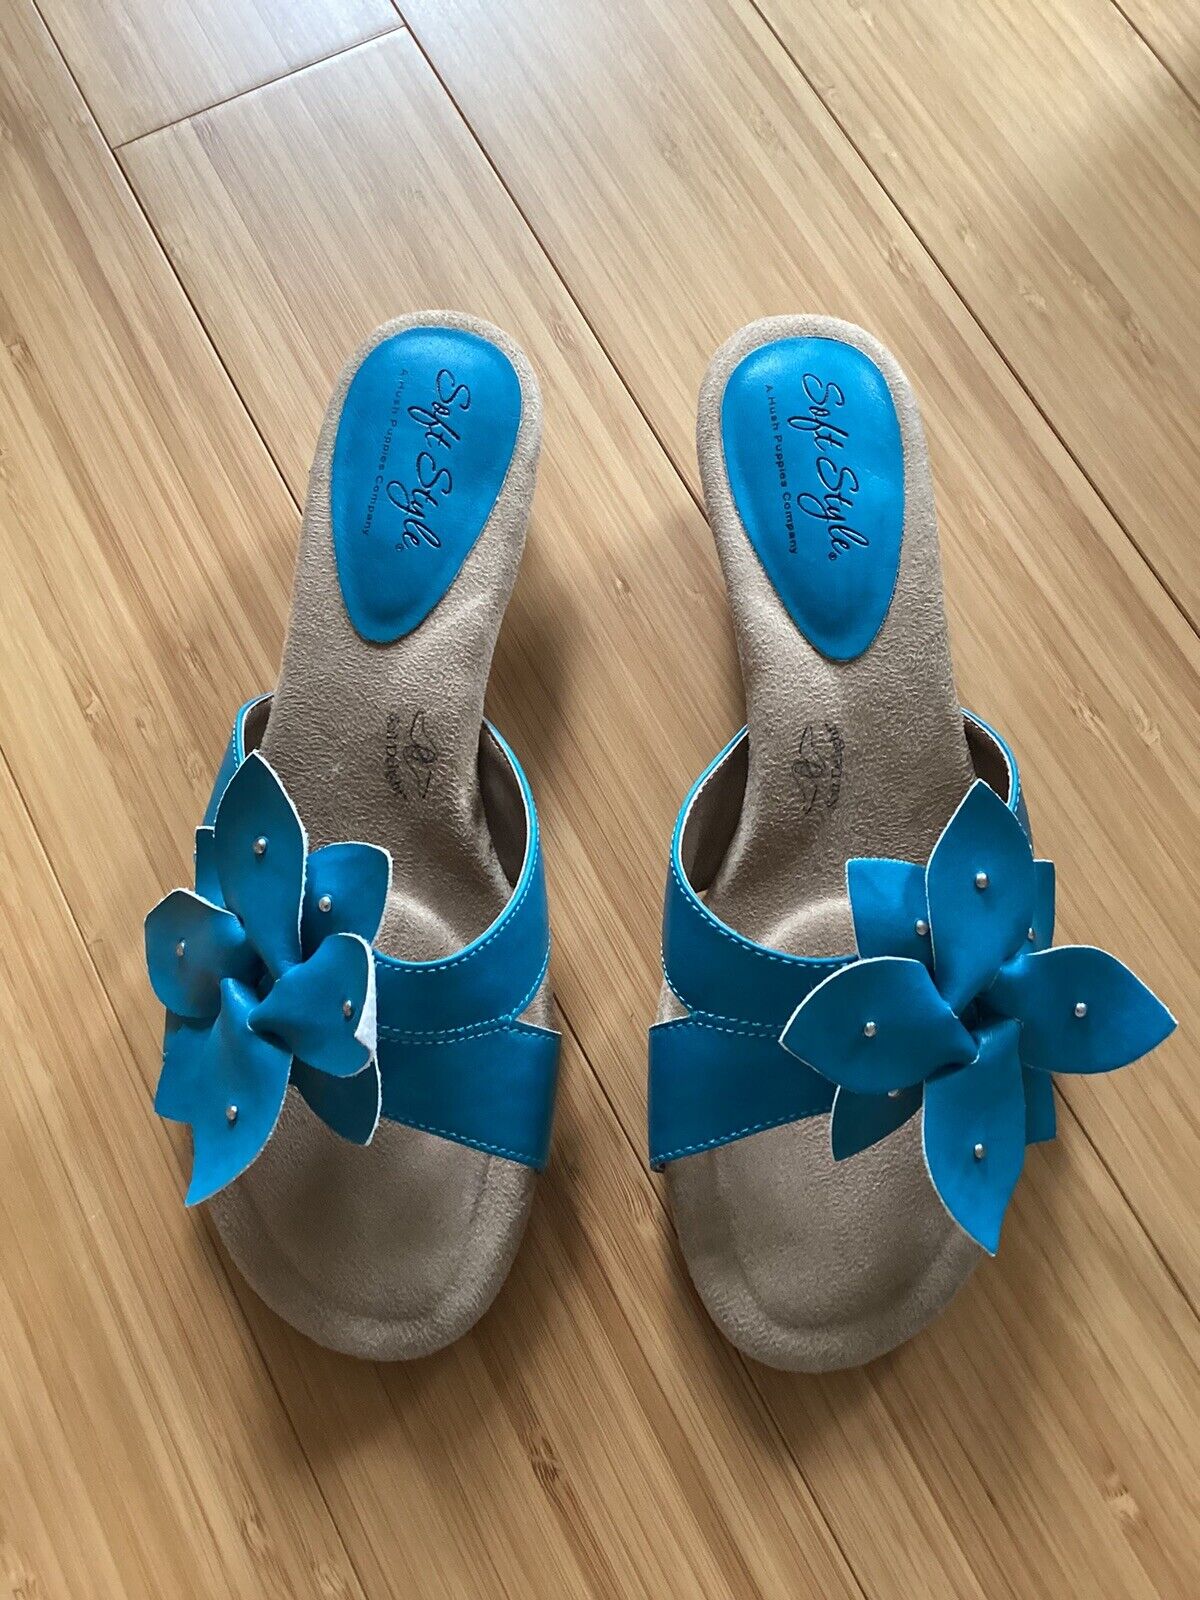 Soft Style By Hush Puppies Women Sandals Turquoise Size 6.5 M Open Toe